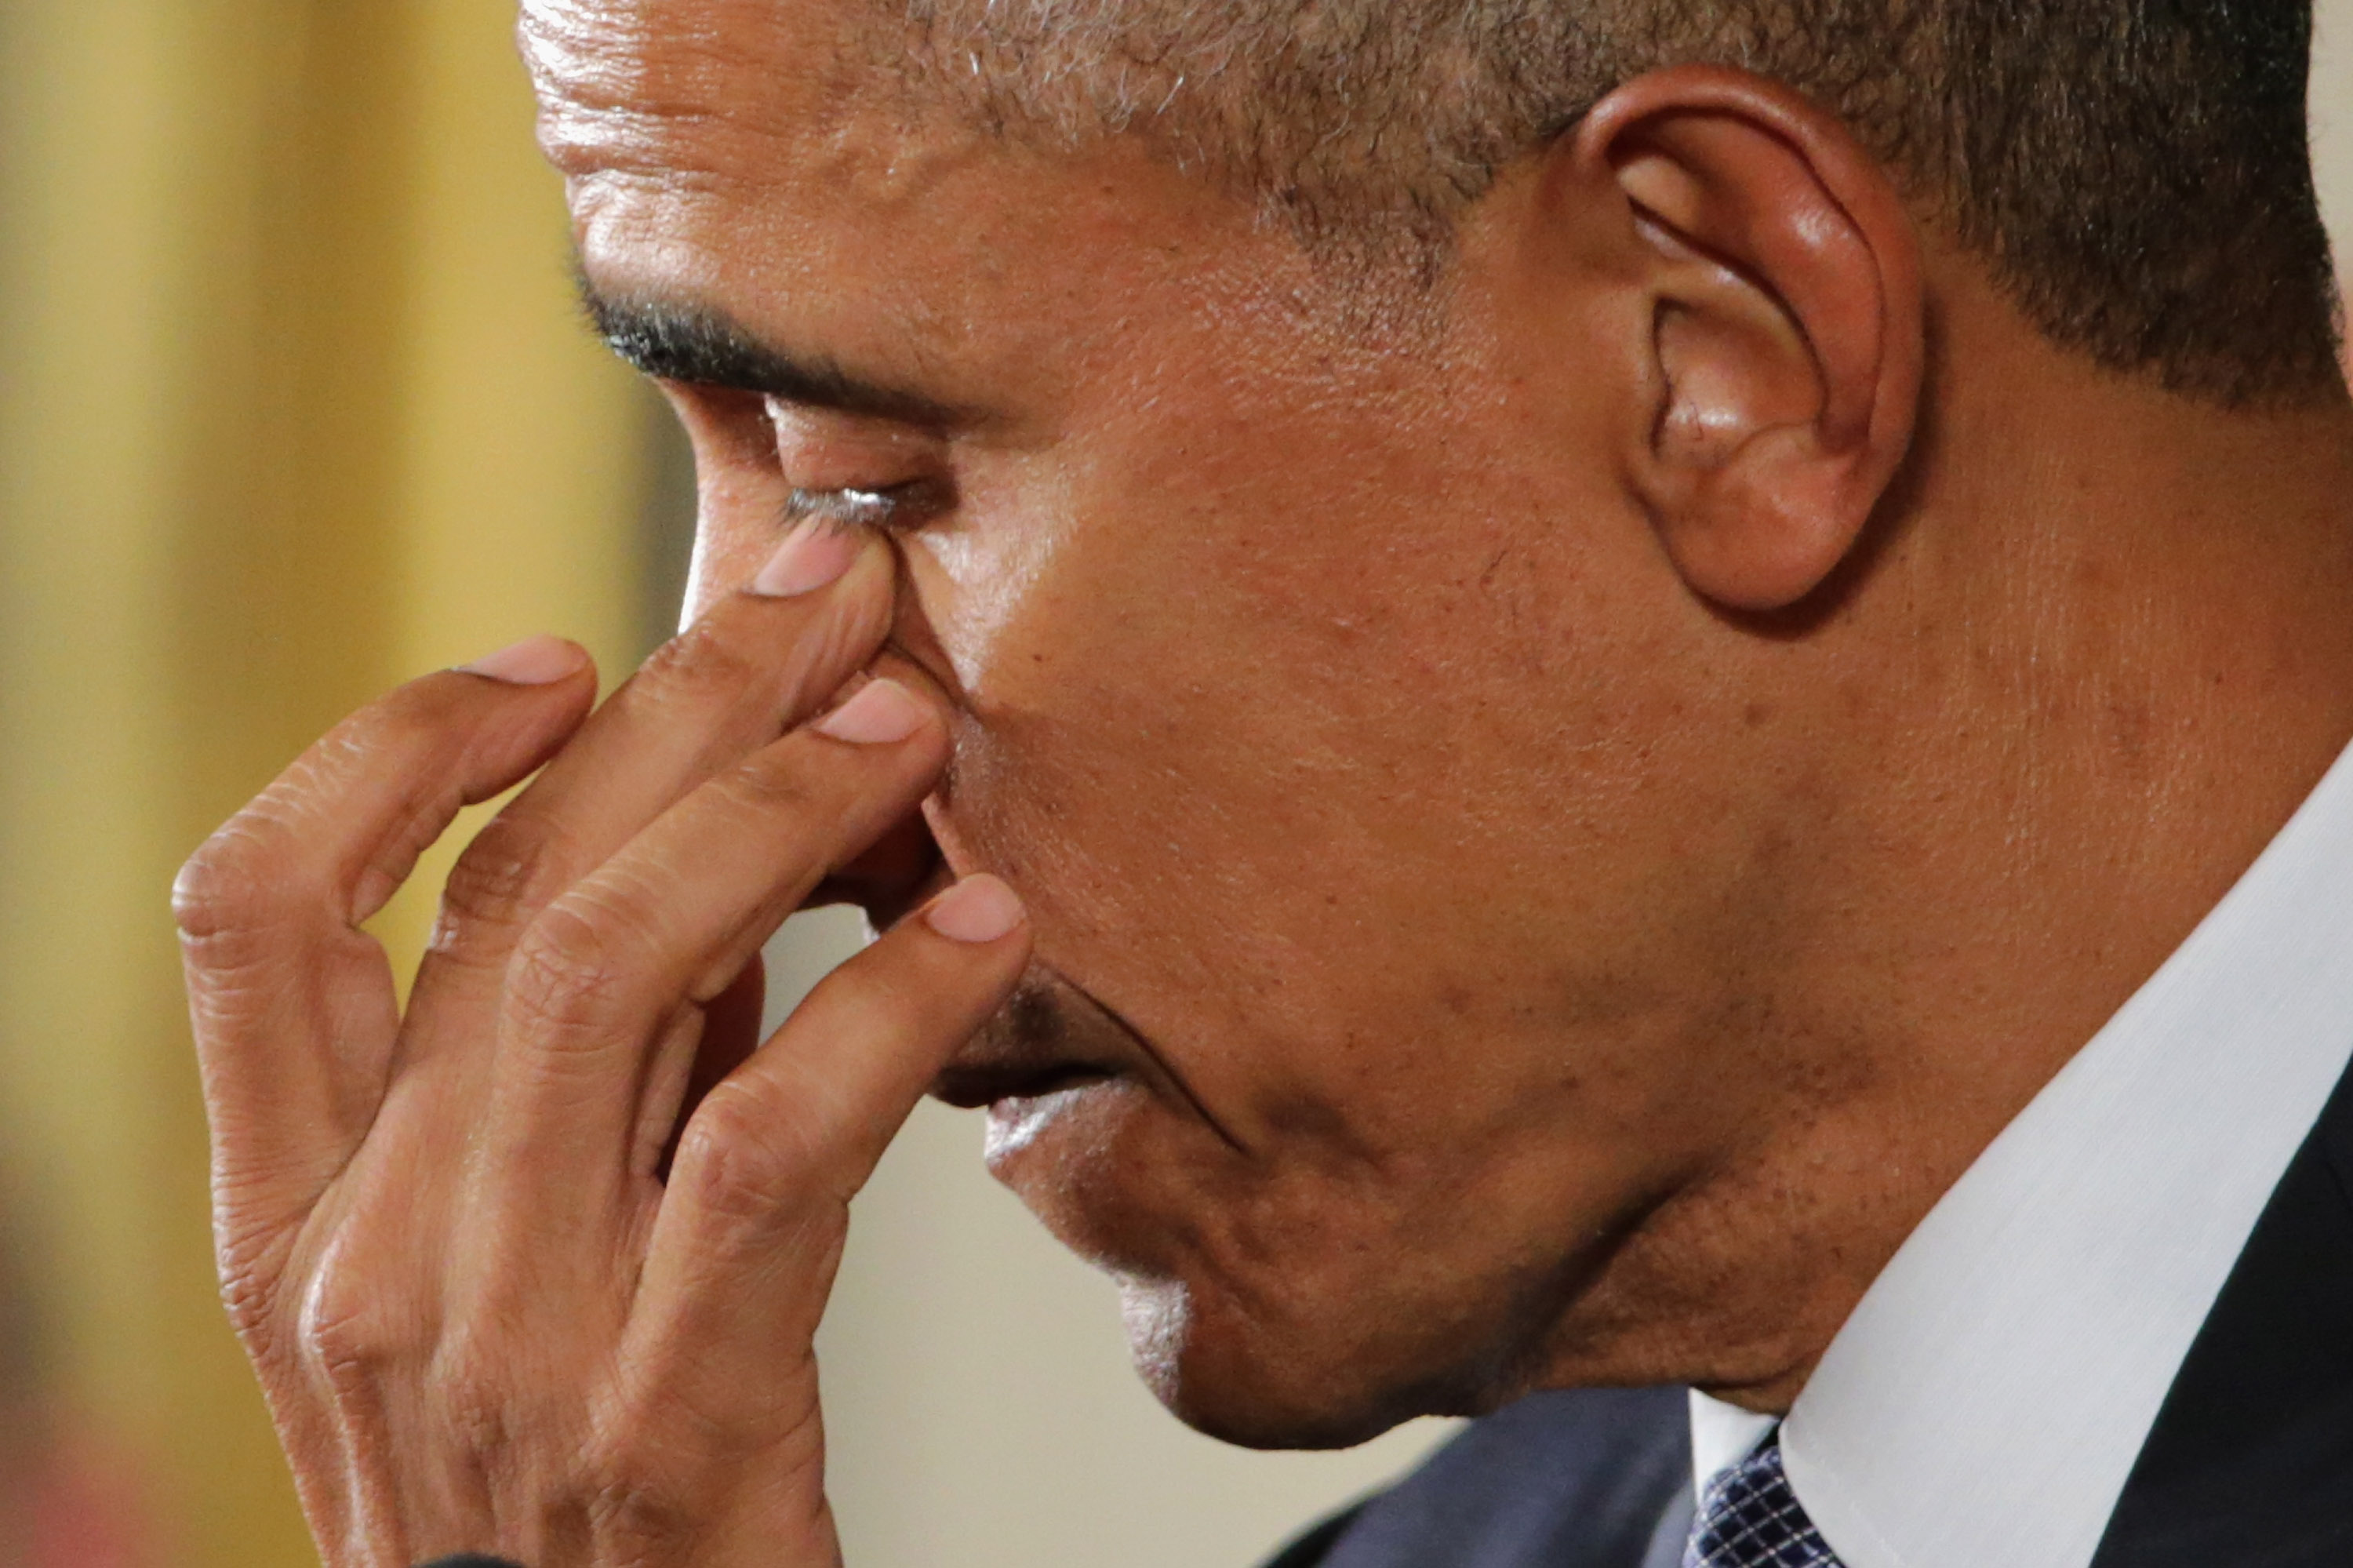 U.S. President Barack Obama wipes away tears as talks about the victims of the 2012 Sandy Hook Elementary School shooting and about his efforts to increase federal gun control in the East Room of the White House in Washington, D.C., on Jan. 5, 2016 (Chip Somodevilla—Getty Images)